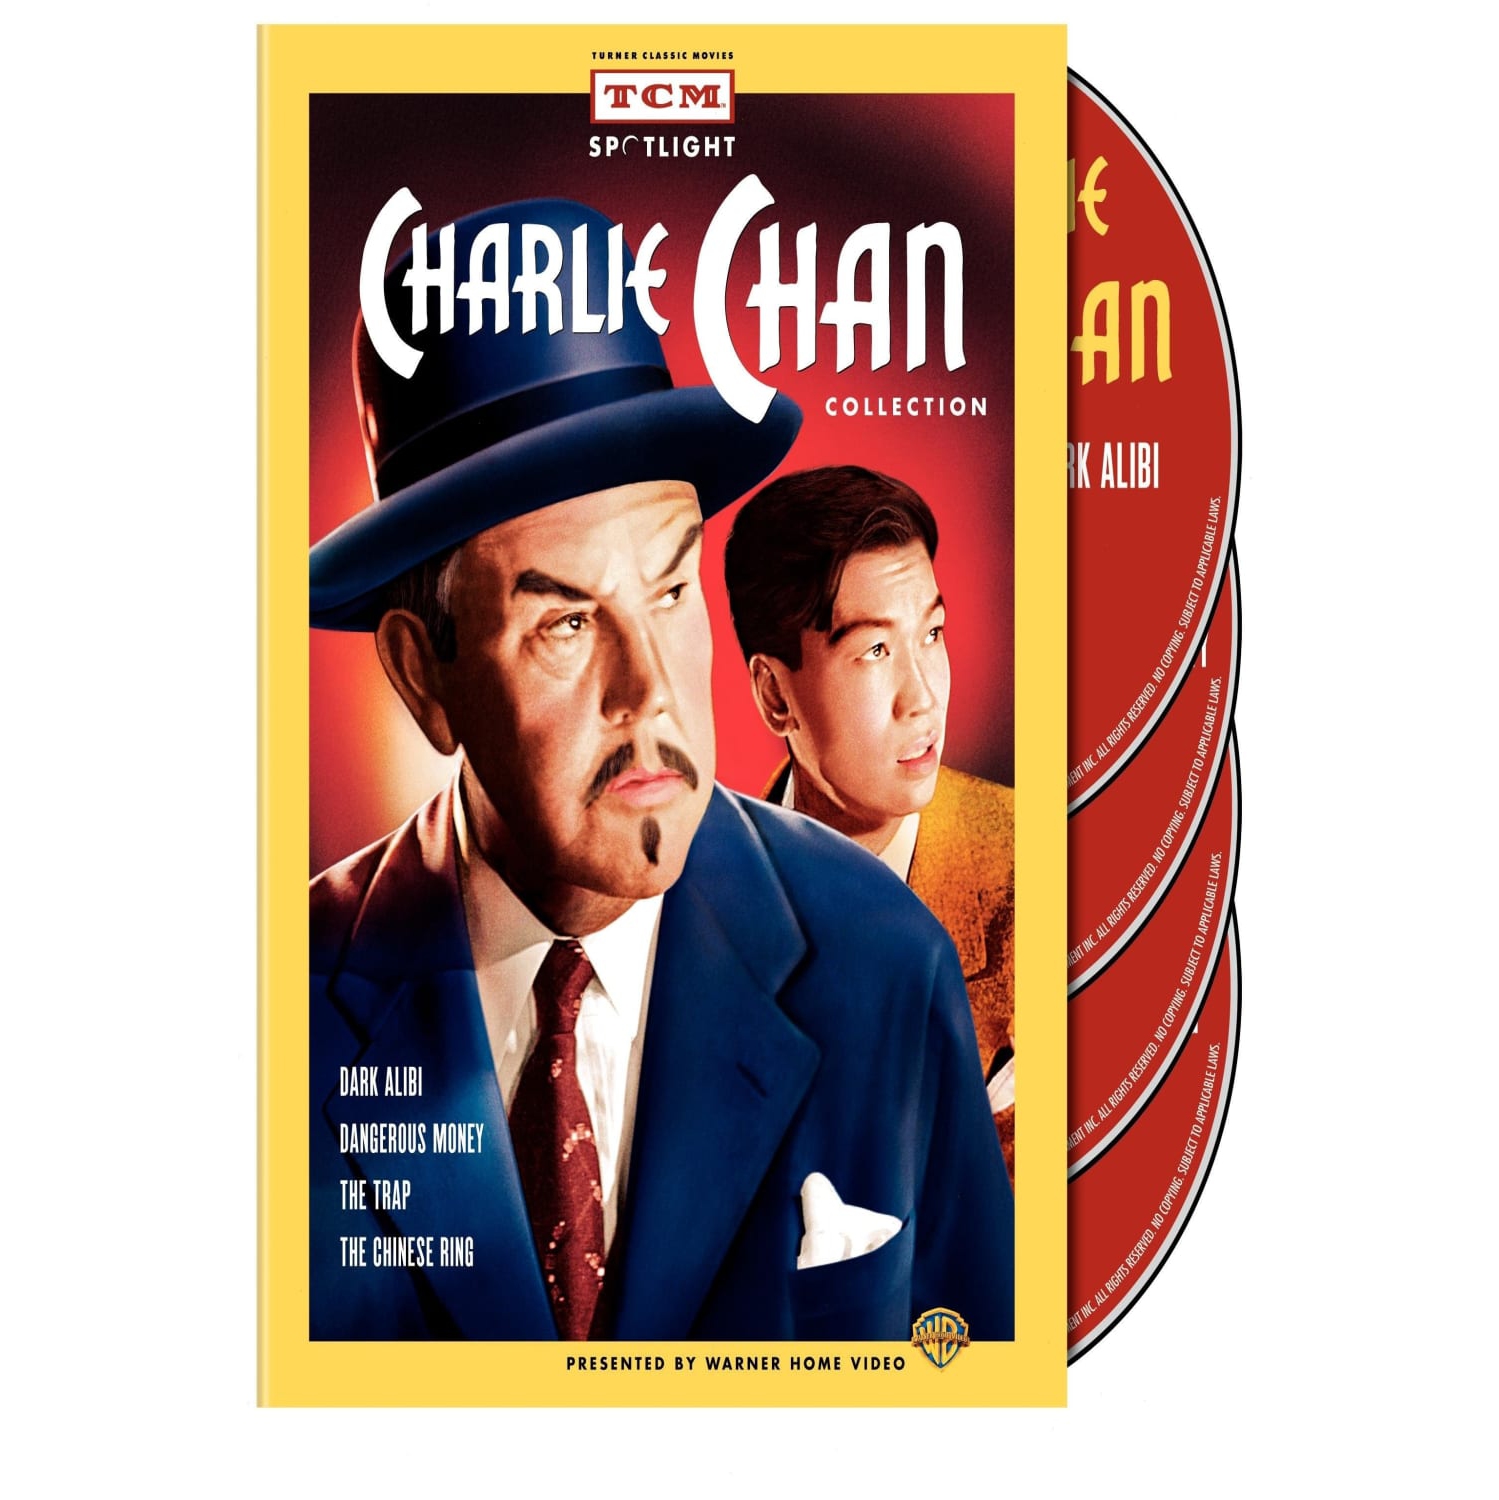 TCM Spotlight: Charlie Chan Collection (Dark Alibi / Dangerous Money / The Trap / The Chinese Ring) (DVD)